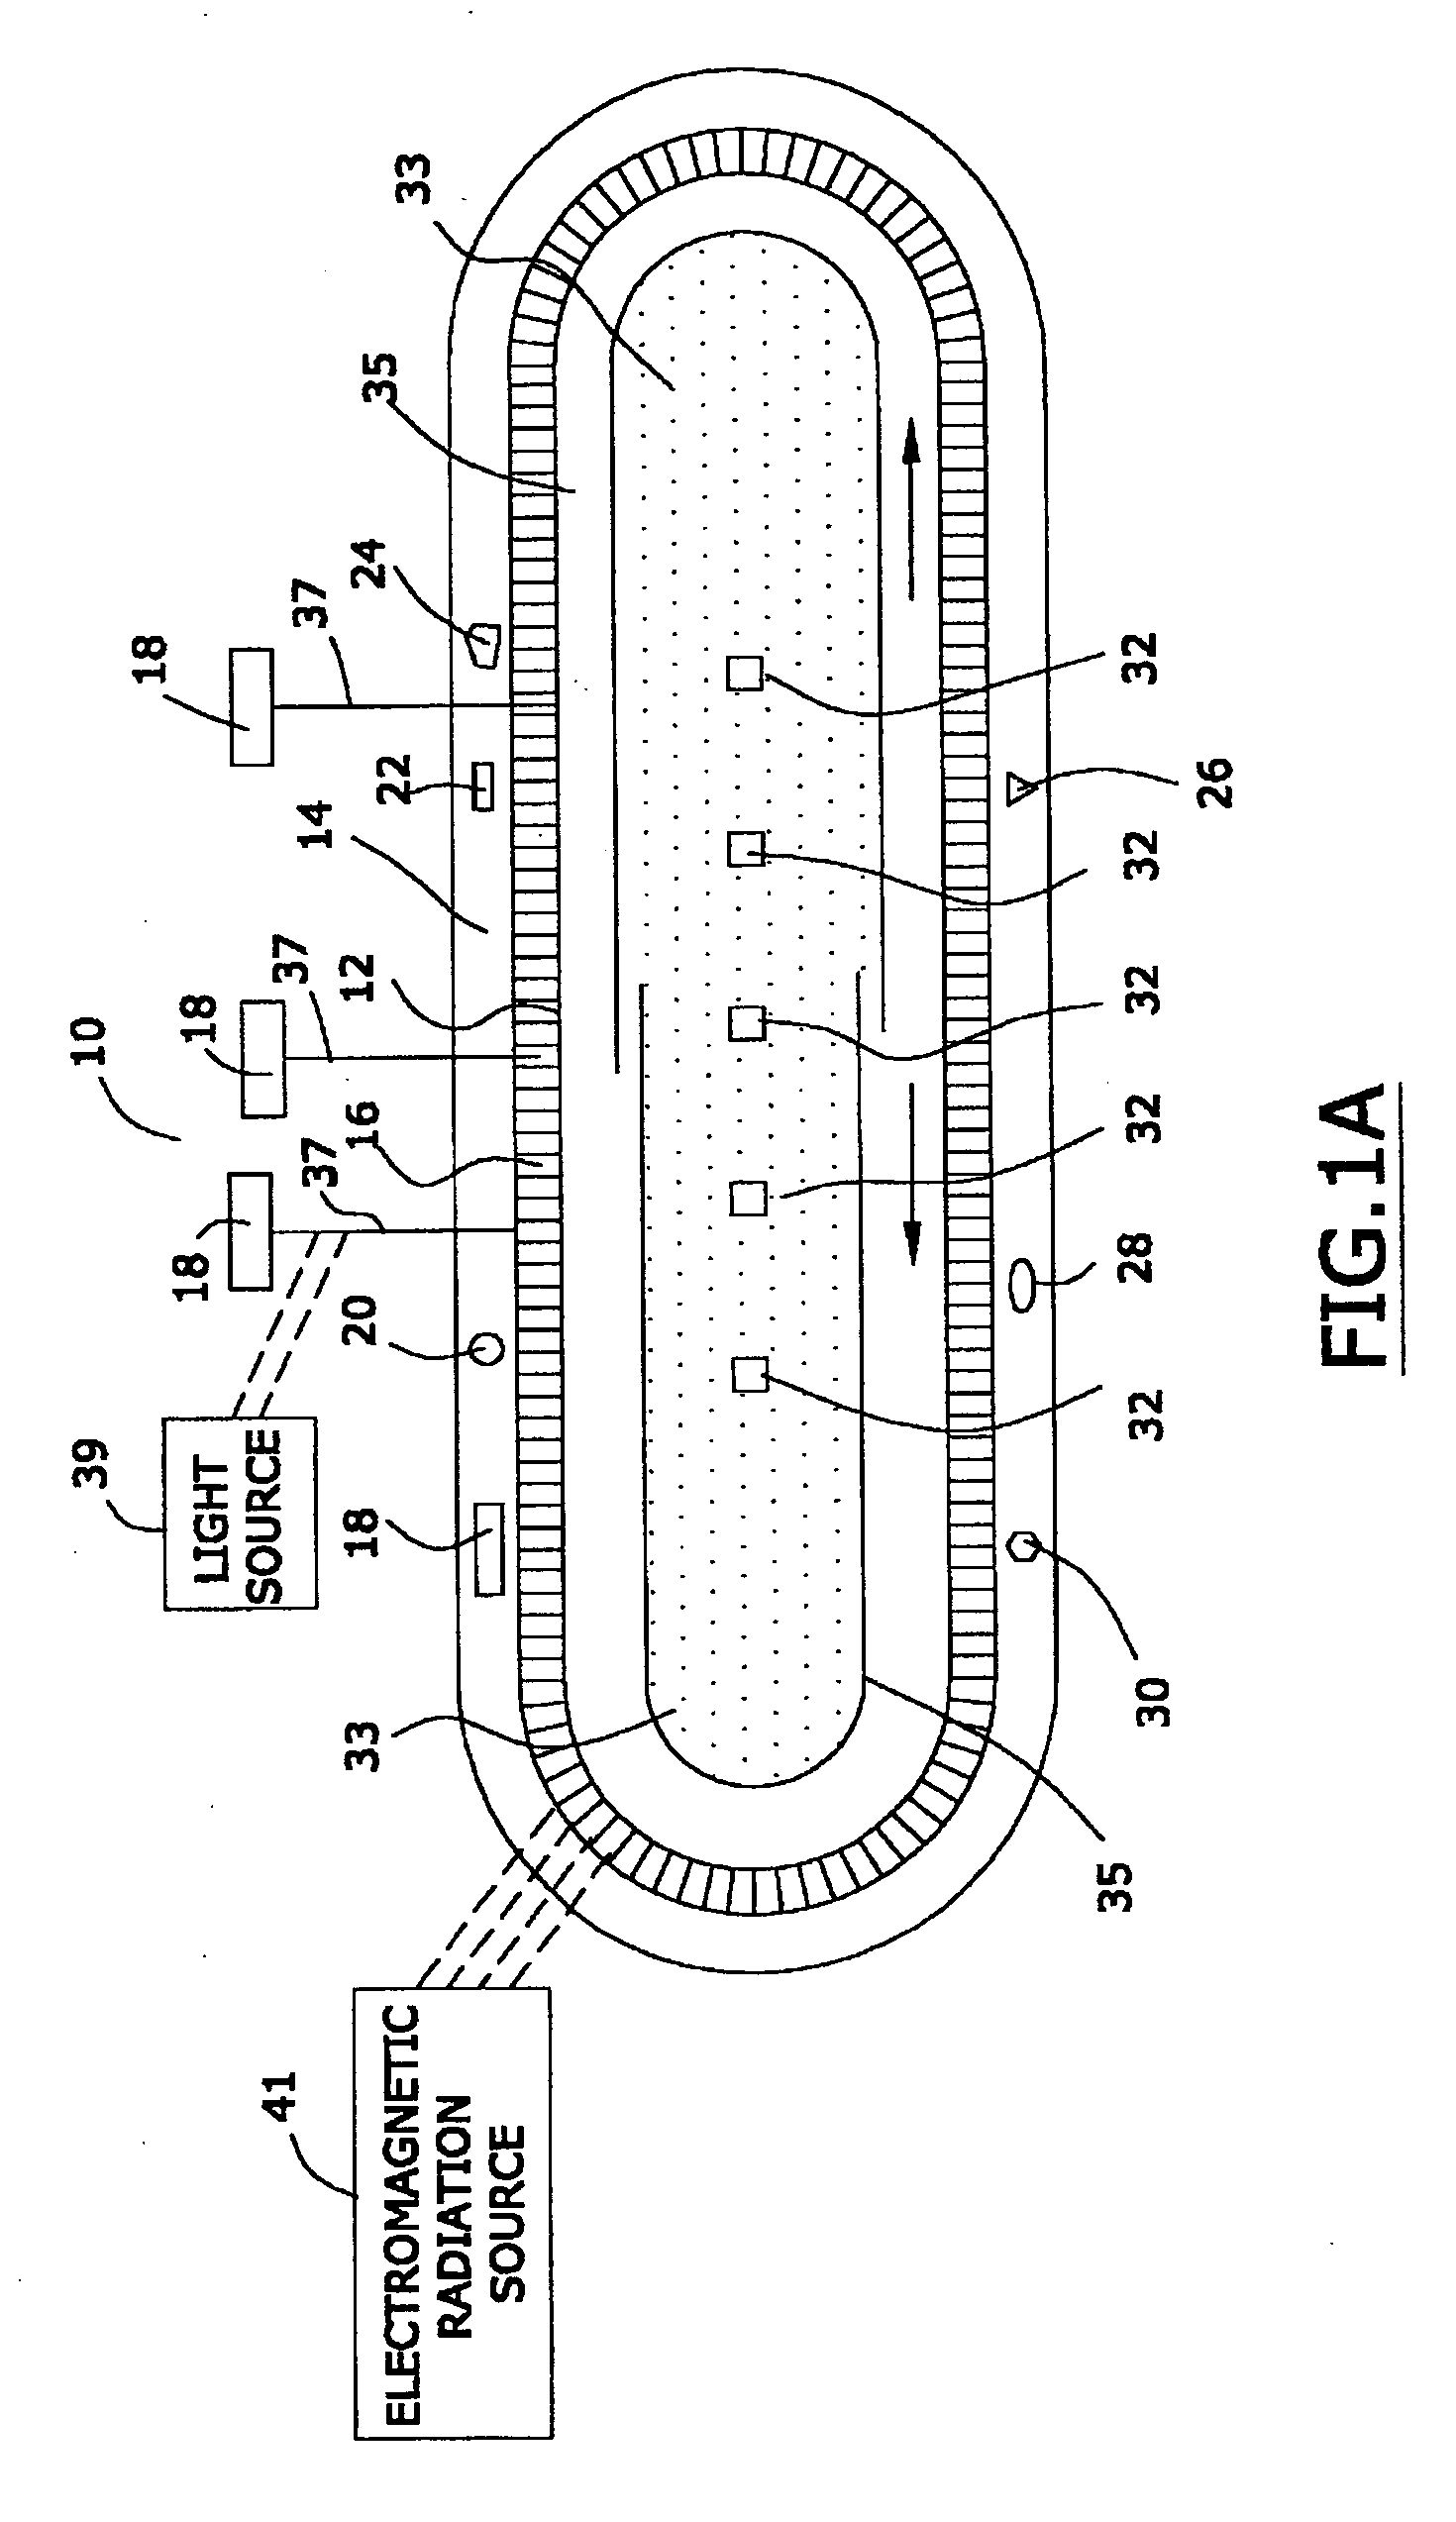 Coated substrate assembly